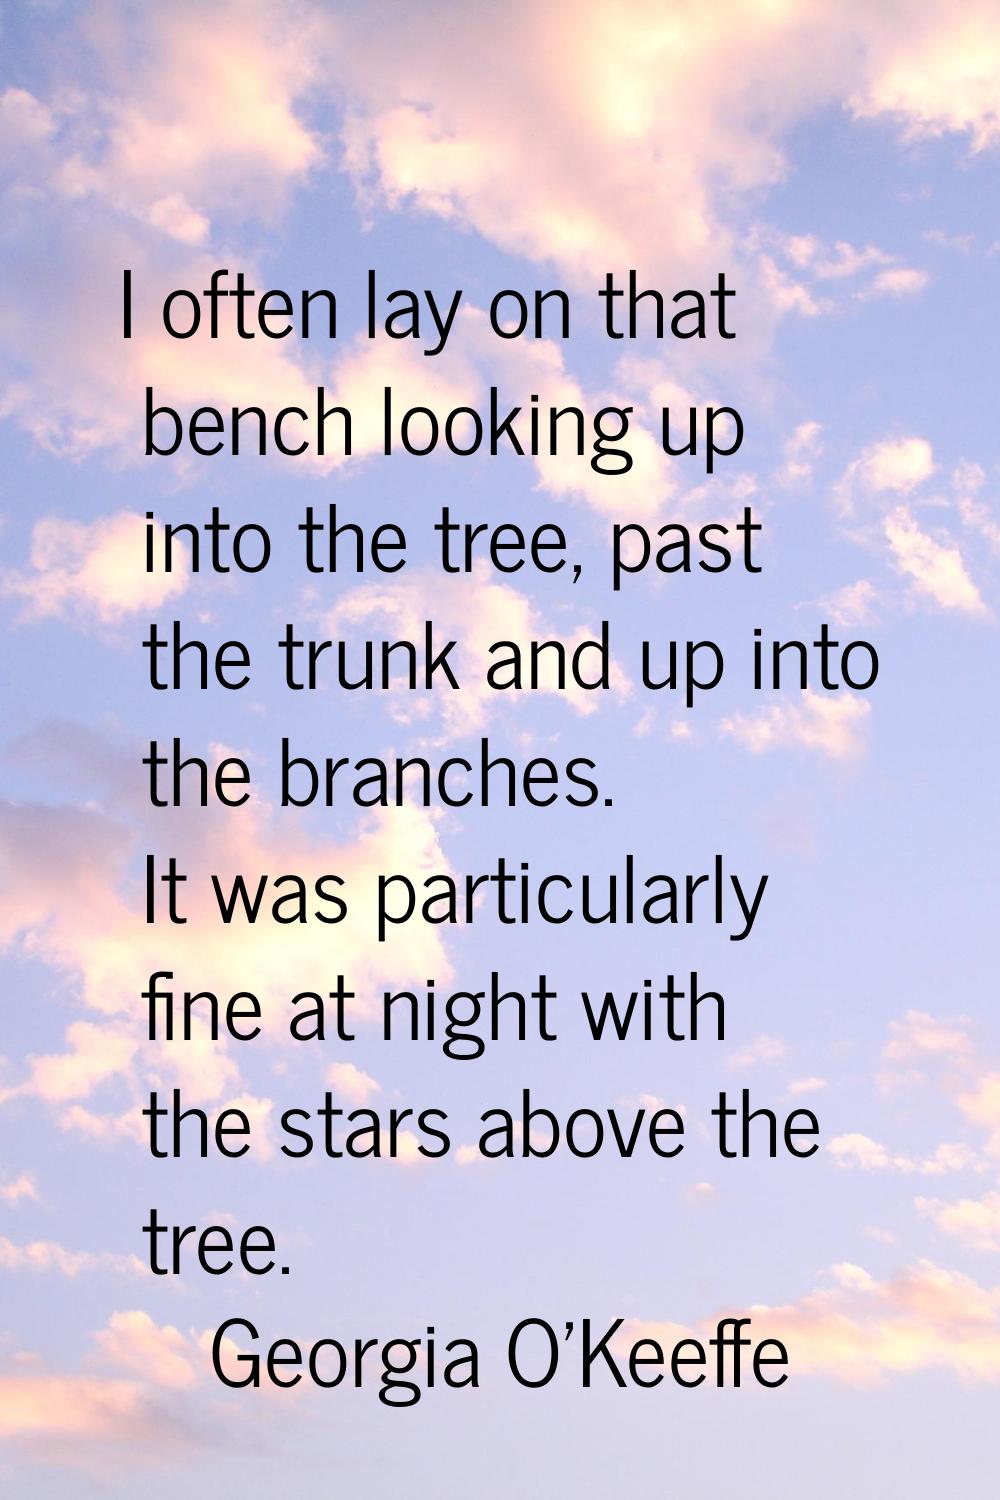 I often lay on that bench looking up into the tree, past the trunk and up into the branches. It was